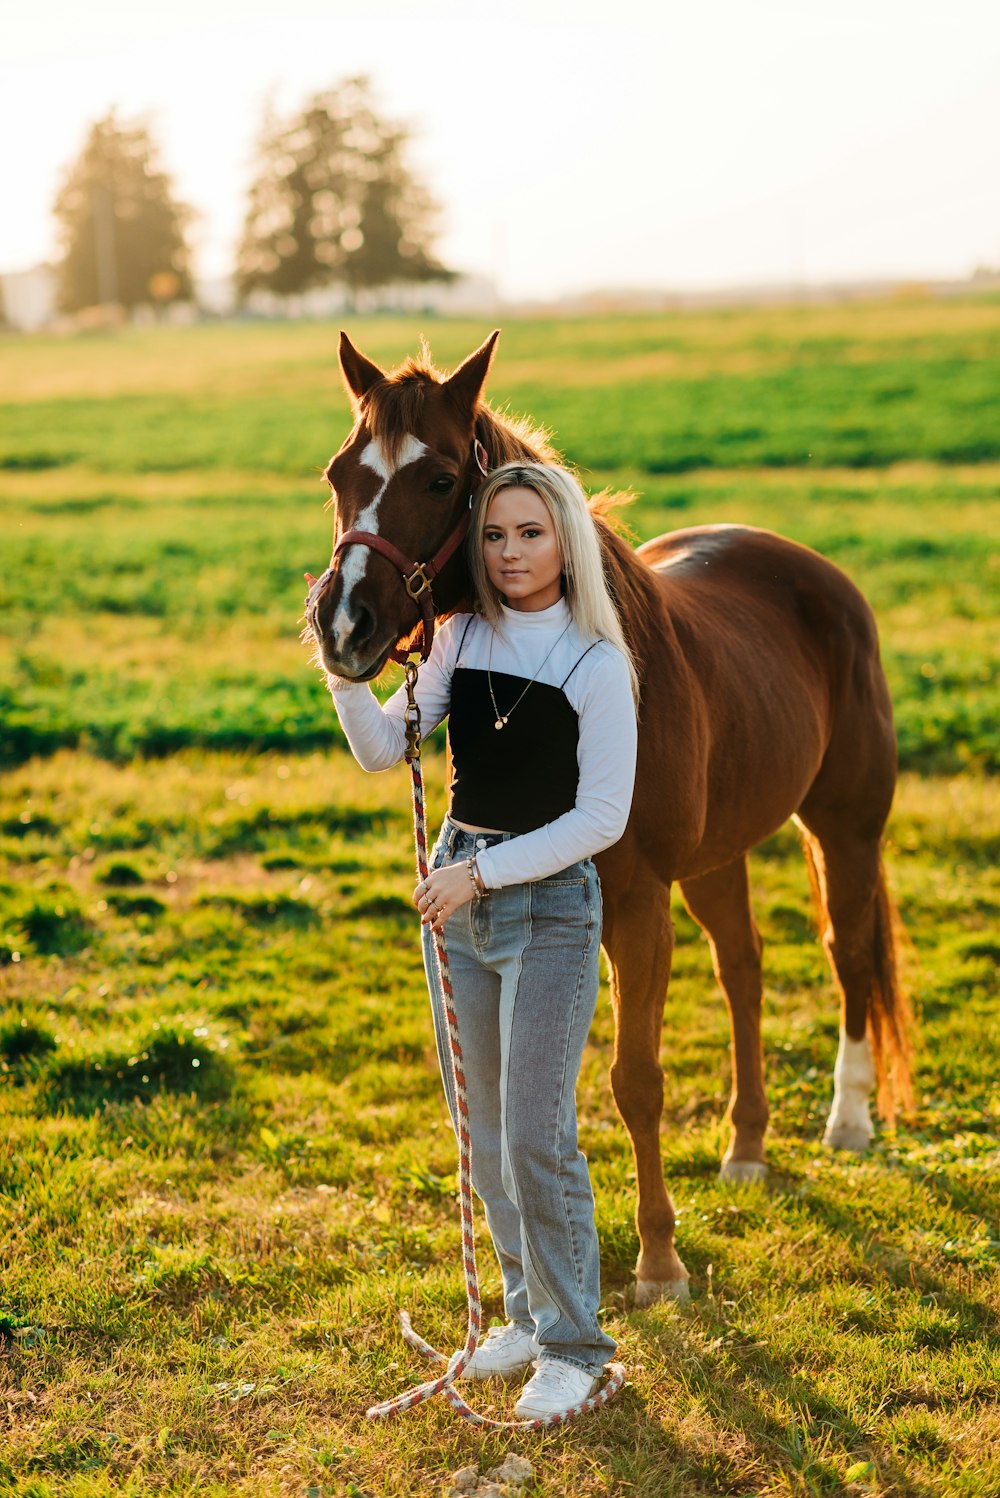 girl in white shirt and blue denim jeans standing on brown horse during daytime